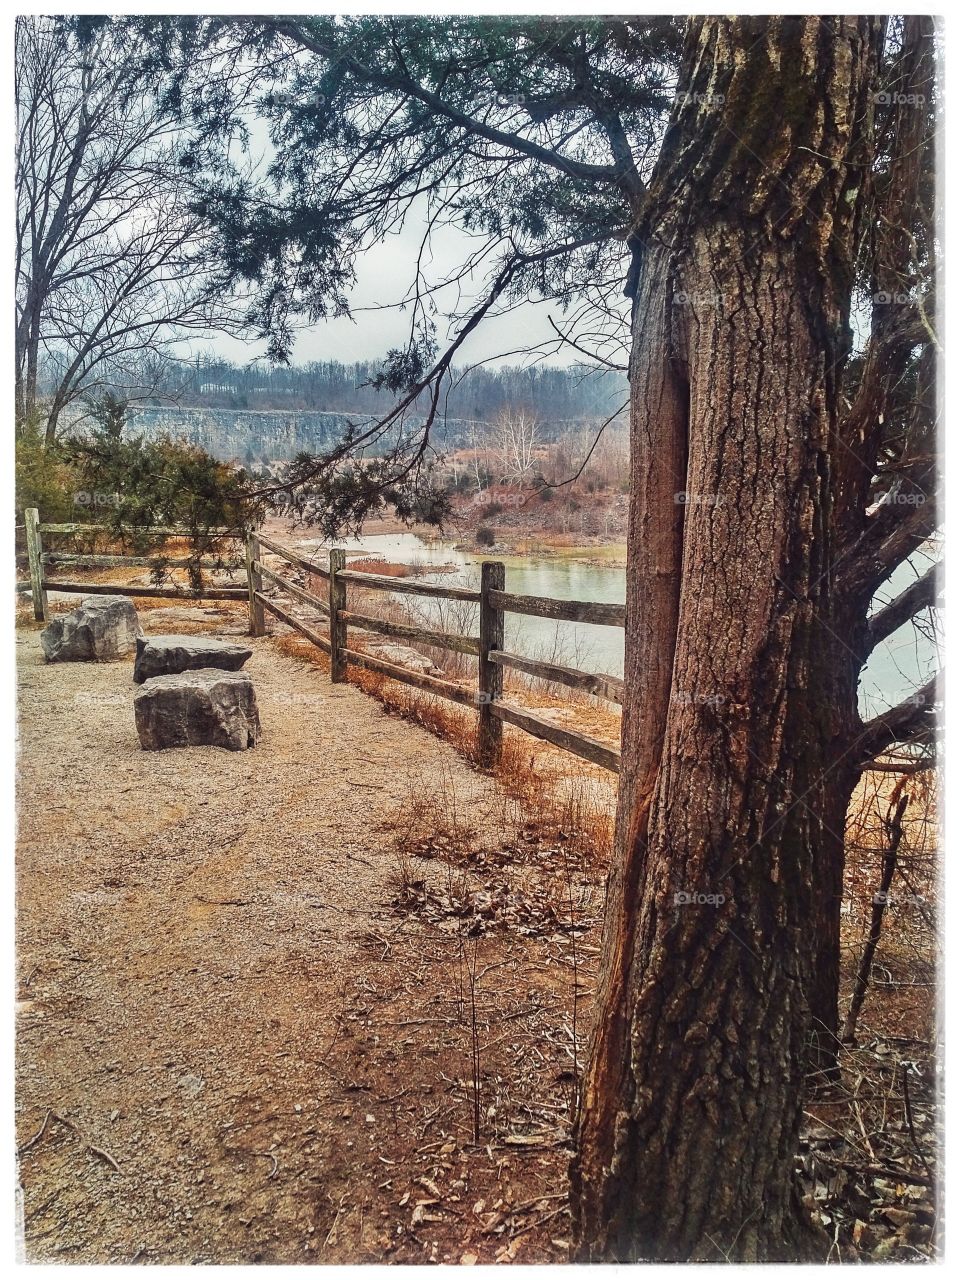 Pines, fence and pond views at nature park